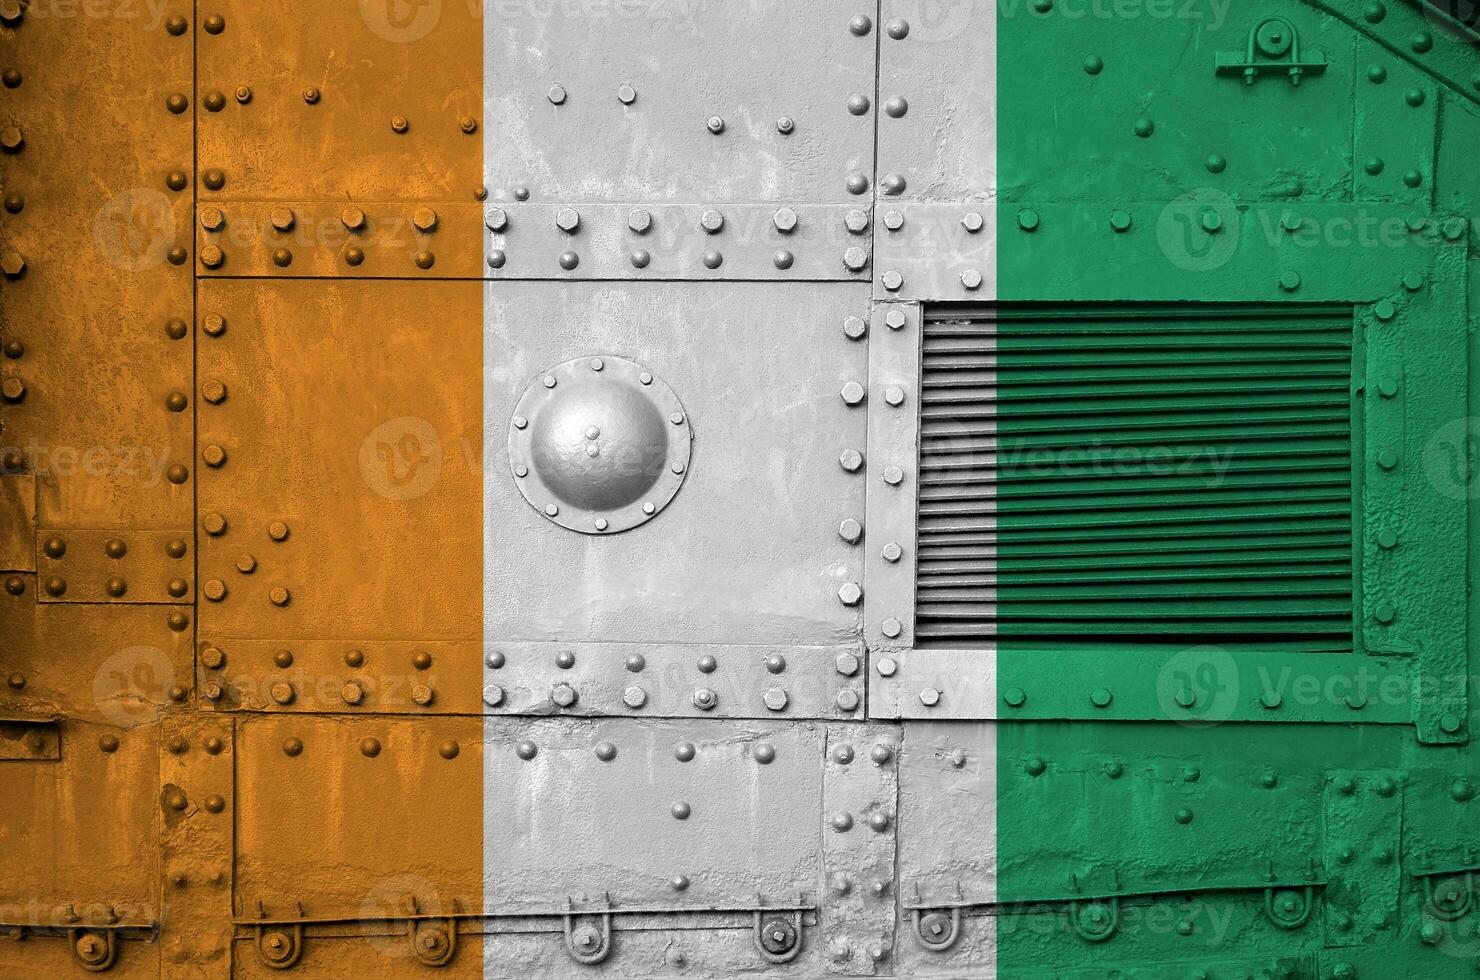 Ivory Coast flag depicted on side part of military armored tank closeup. Army forces conceptual background photo